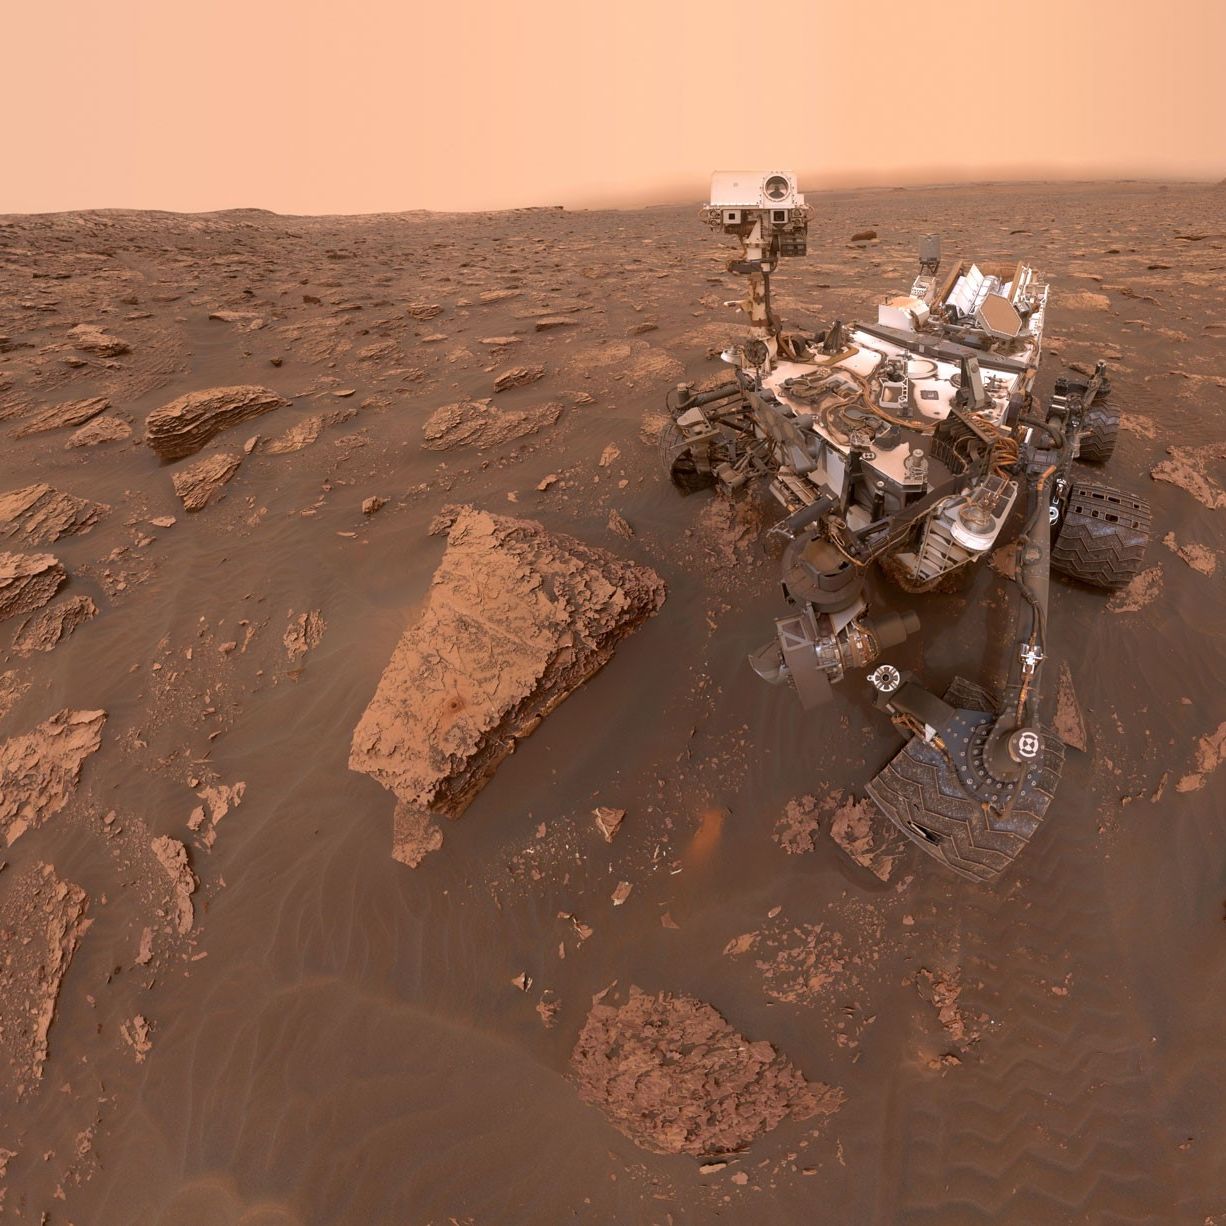 If We Find Fossils On Mars, They Could Be Fake, Scientists Warn